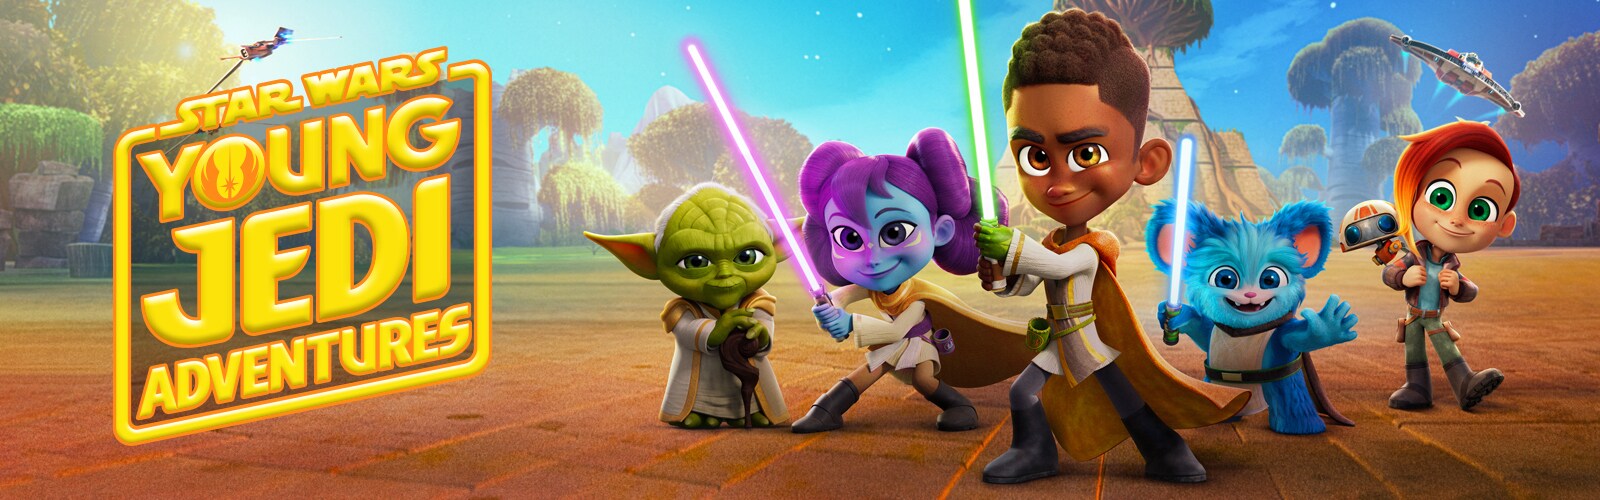 Young Jedi Adventures key art and logo